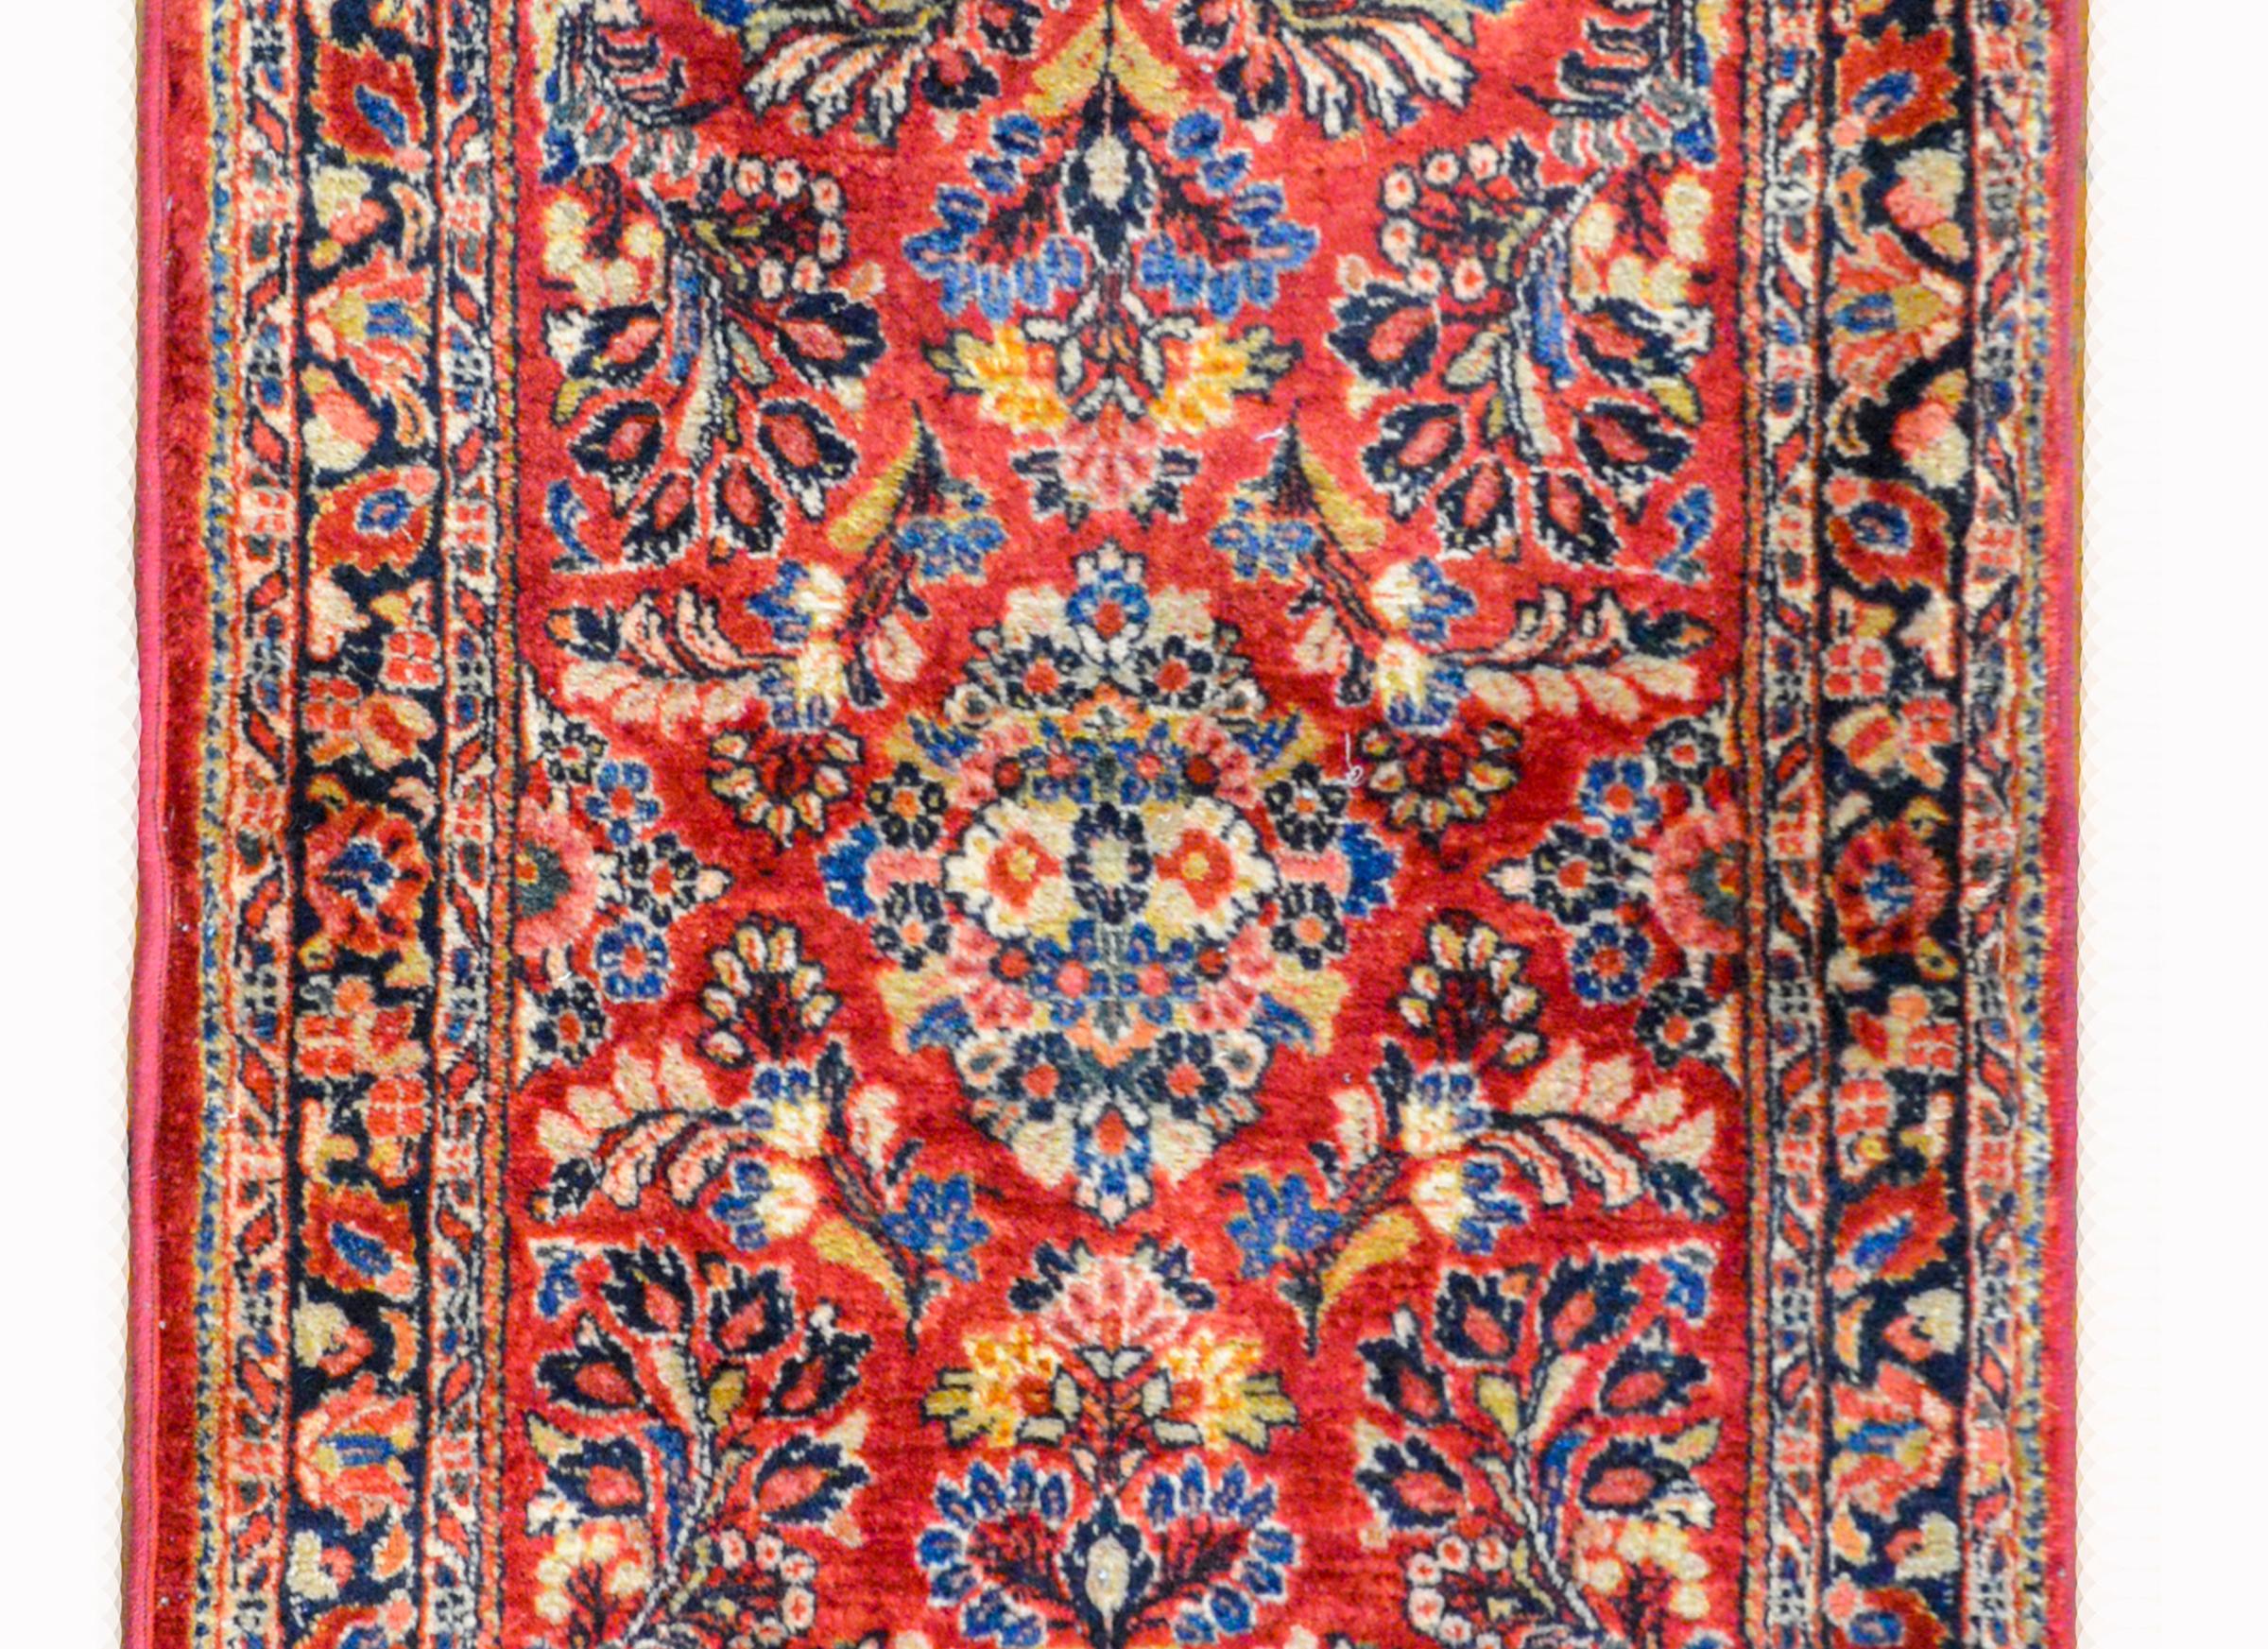 A gorgeous early 20th century Persian Sarouk rug with an all-over pattern containing several large flower clusters woven in indigo, pink, gold, and white, against a dark cranberry background. The border is wonderful with a central floral patterned